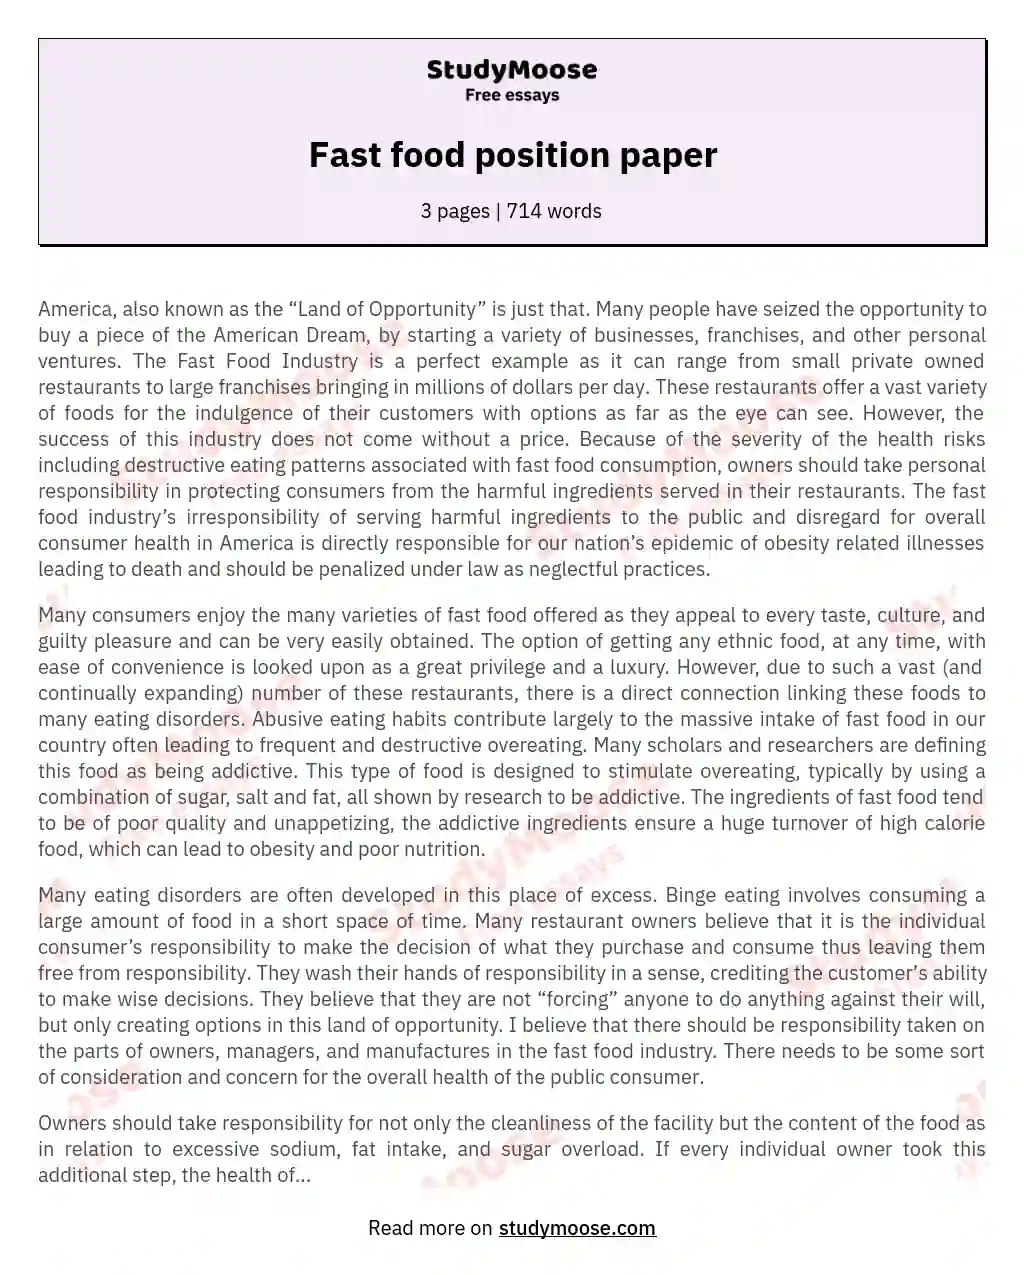 Fast food position paper essay